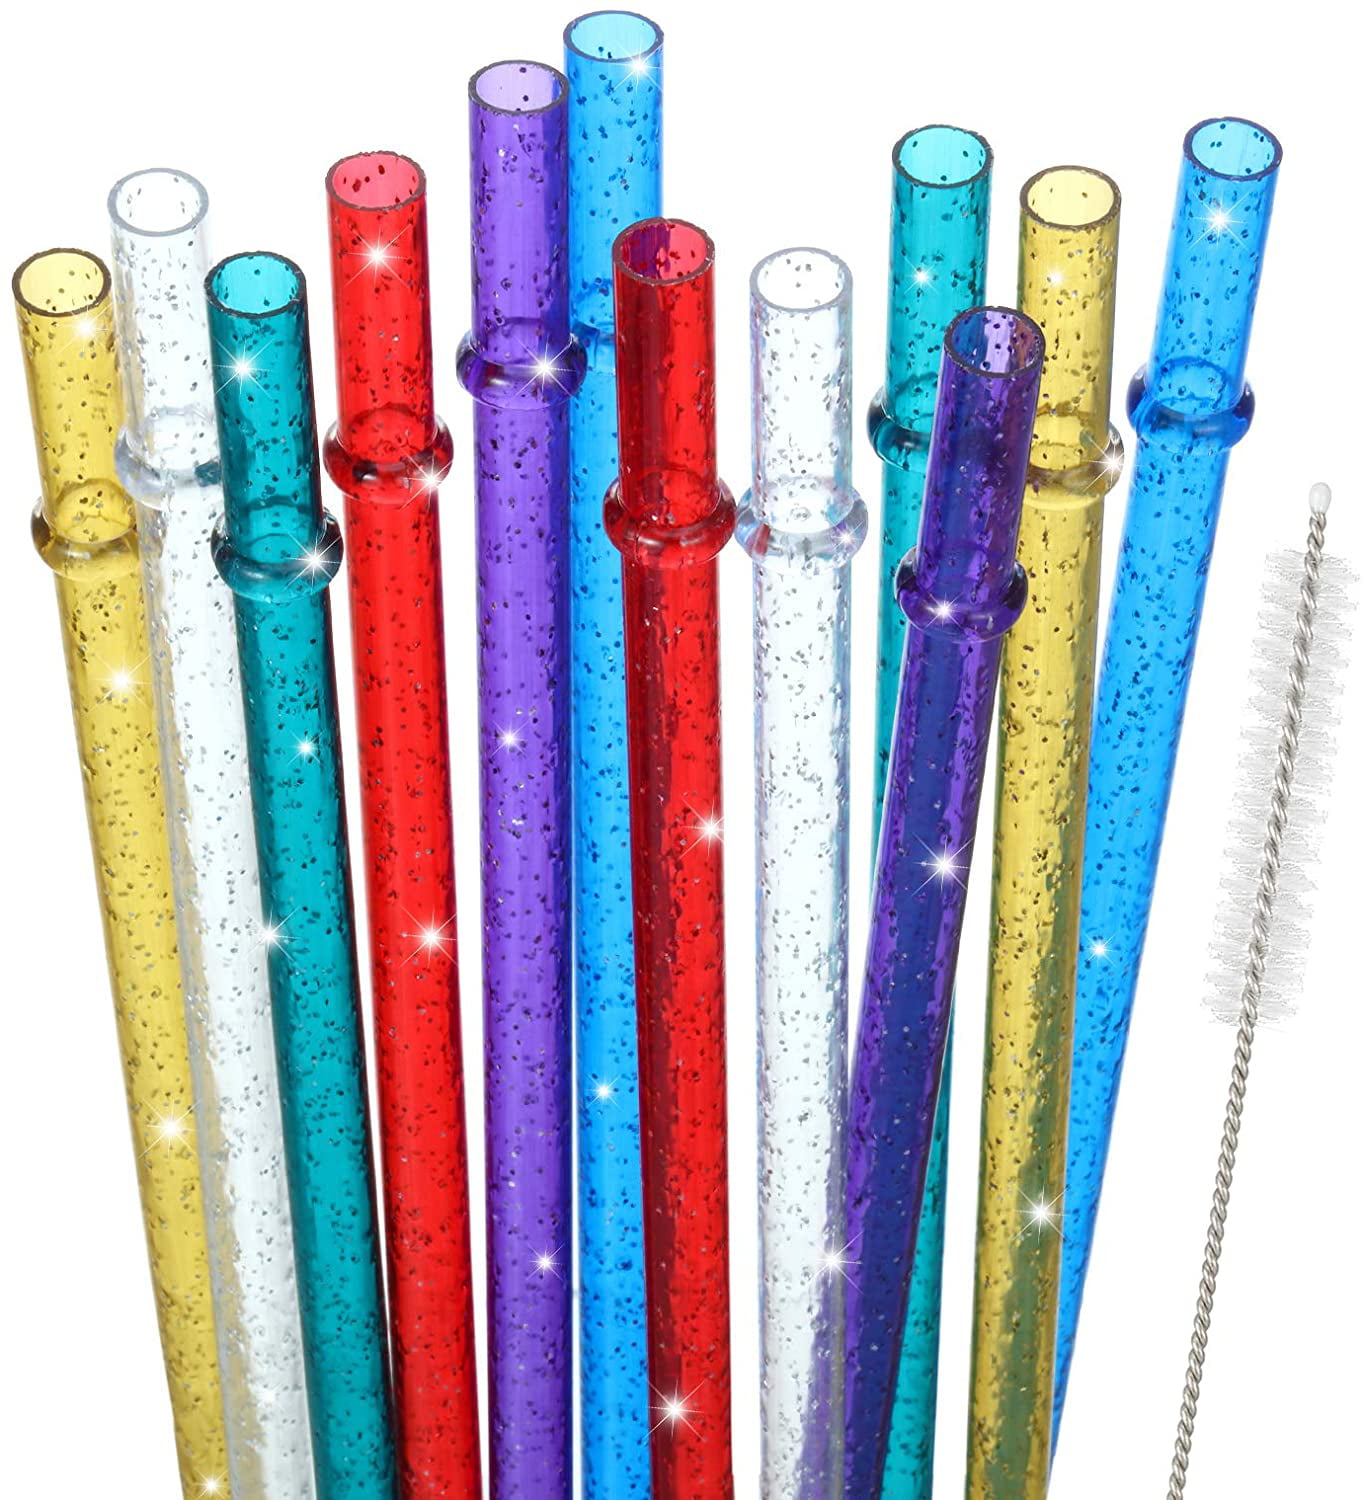 50 Mixed Reusable Colored Straws Hard Plastic Acrylic with Rings BPA Free 